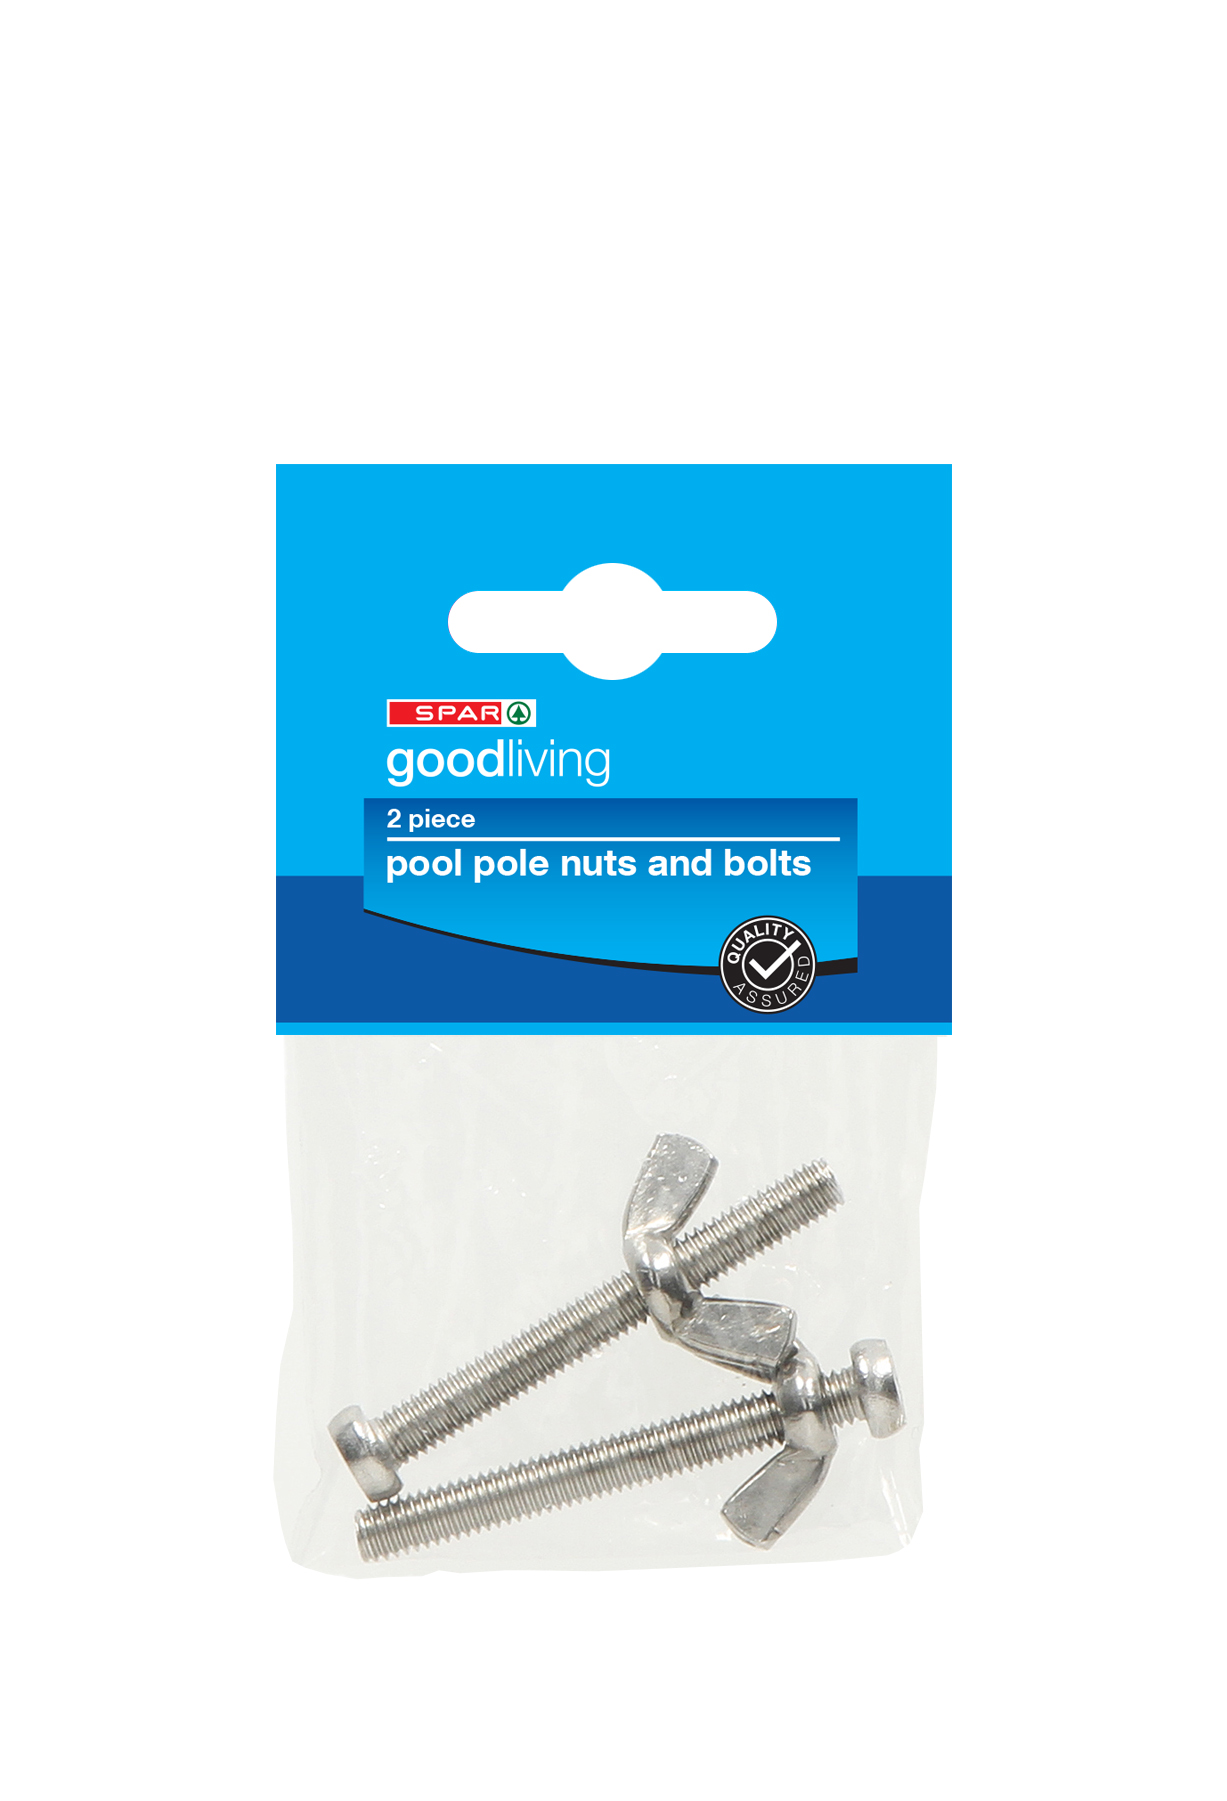 pool pole nuts and bolts - 2 piece